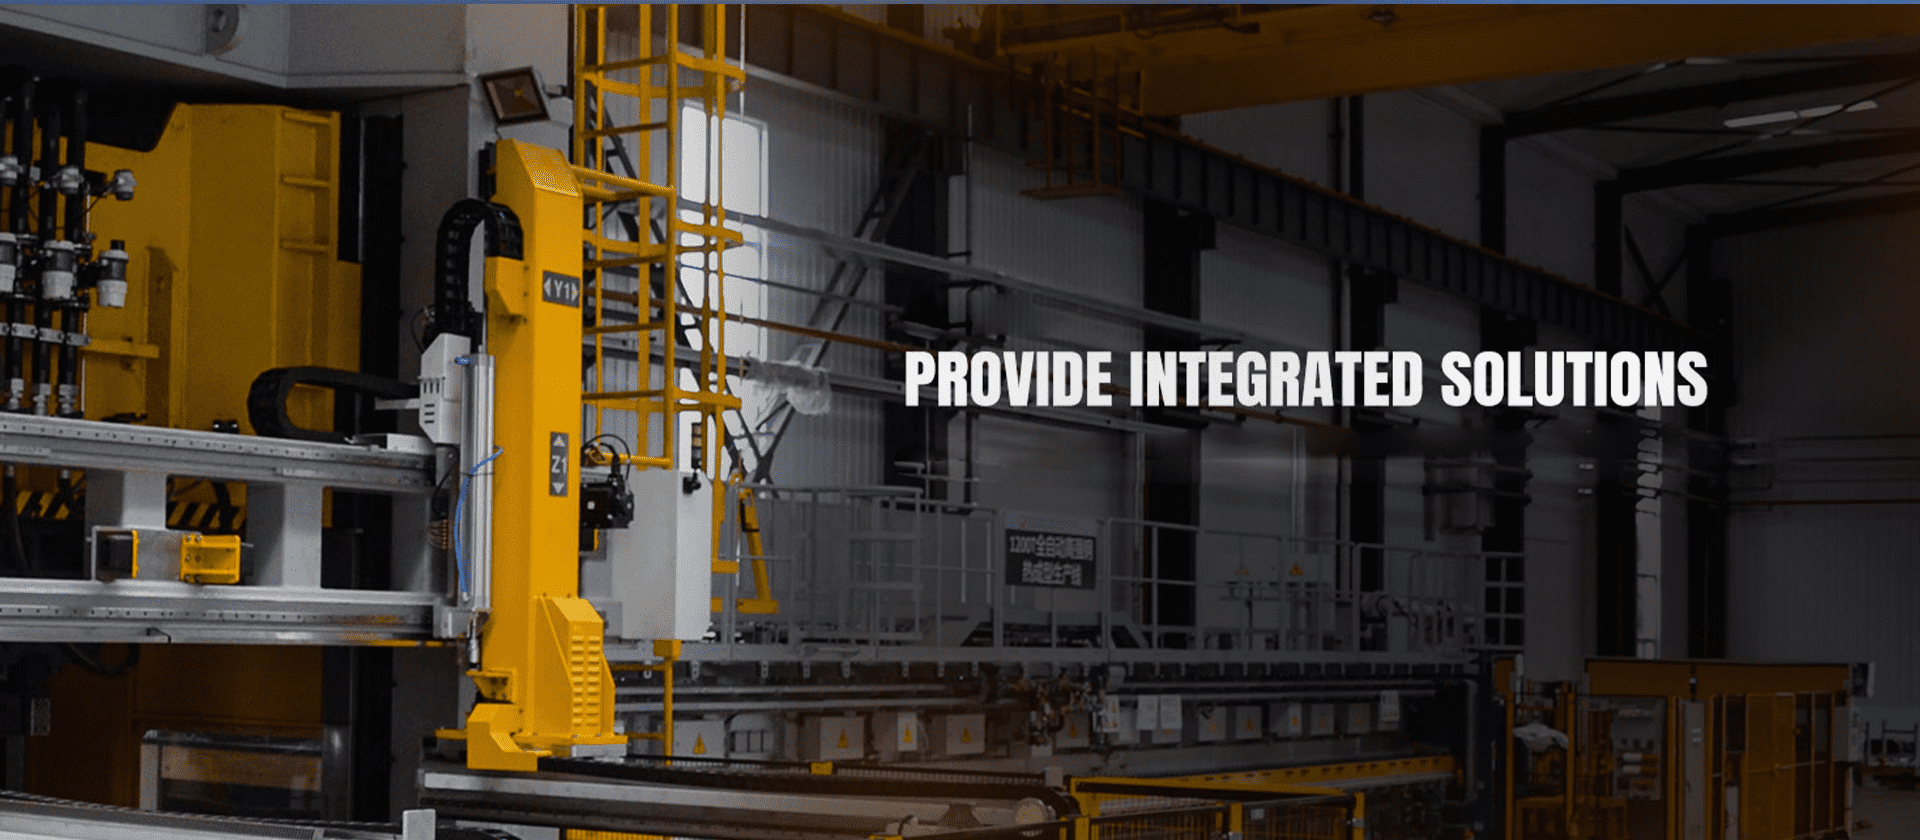 PROVIDE INTEGRATED SOLUTIONS